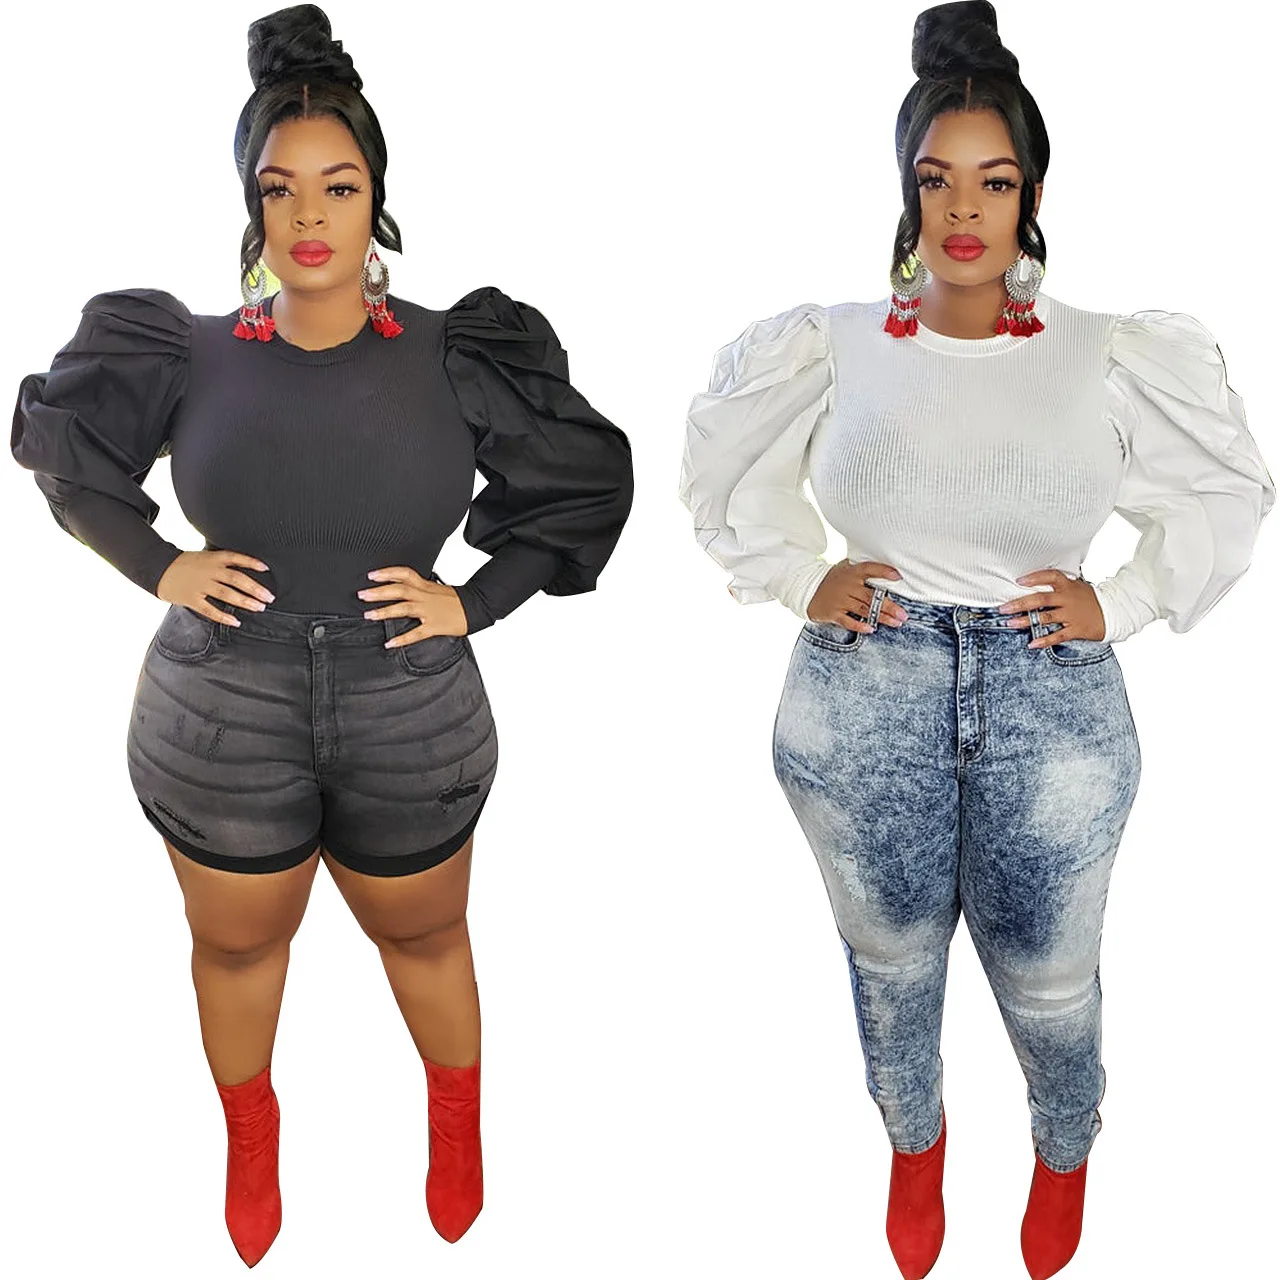 

2020 Hot Selling Fat Women Plus Size 5XL Slim Fitted Puff Long Sleeve Ribbed Top And Blouses, White and black or custom